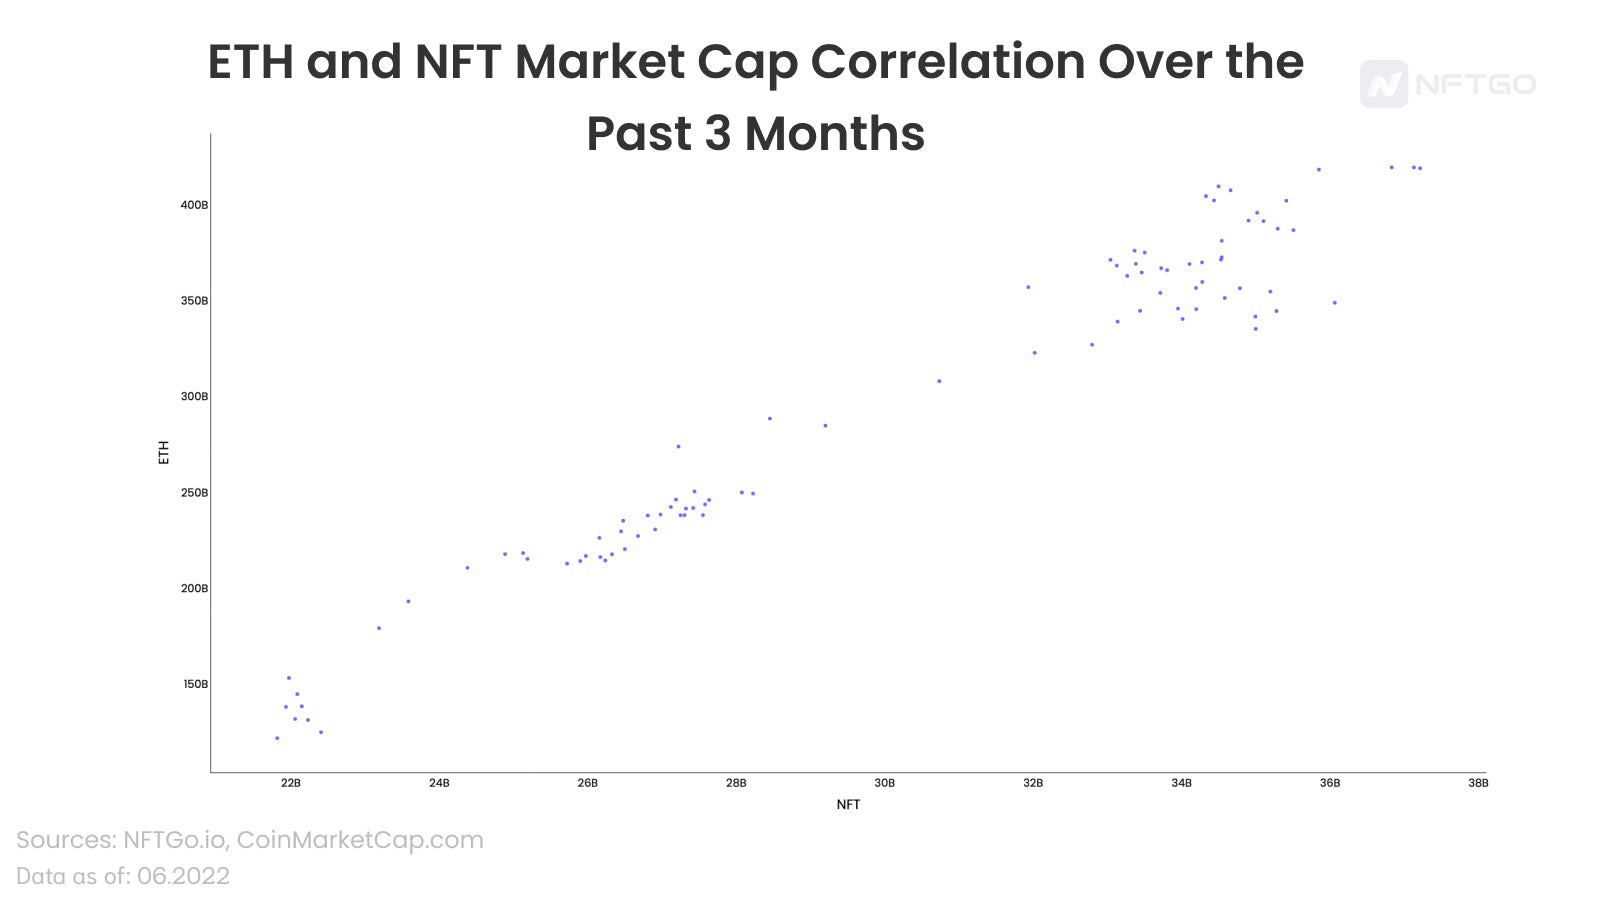 ETH and NFT Market Cap Correlation Over the Past 3 Months 